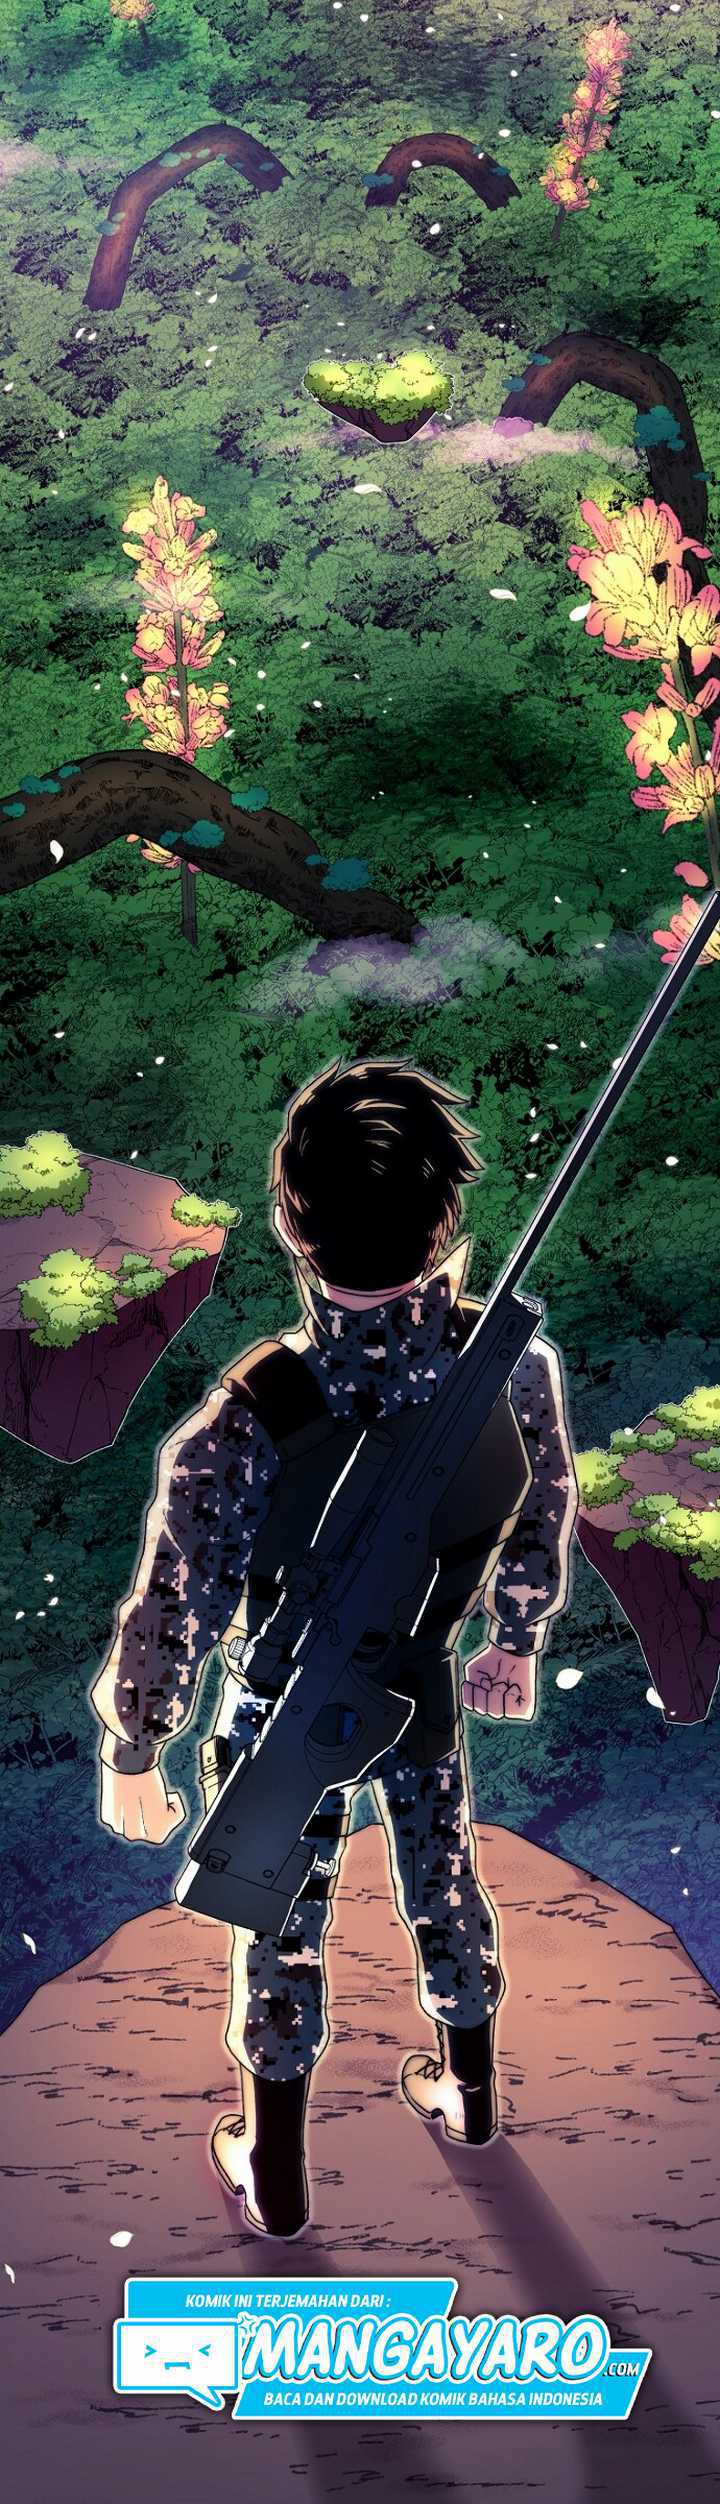 Magical Shooting : Sniper of Steel Chapter 00